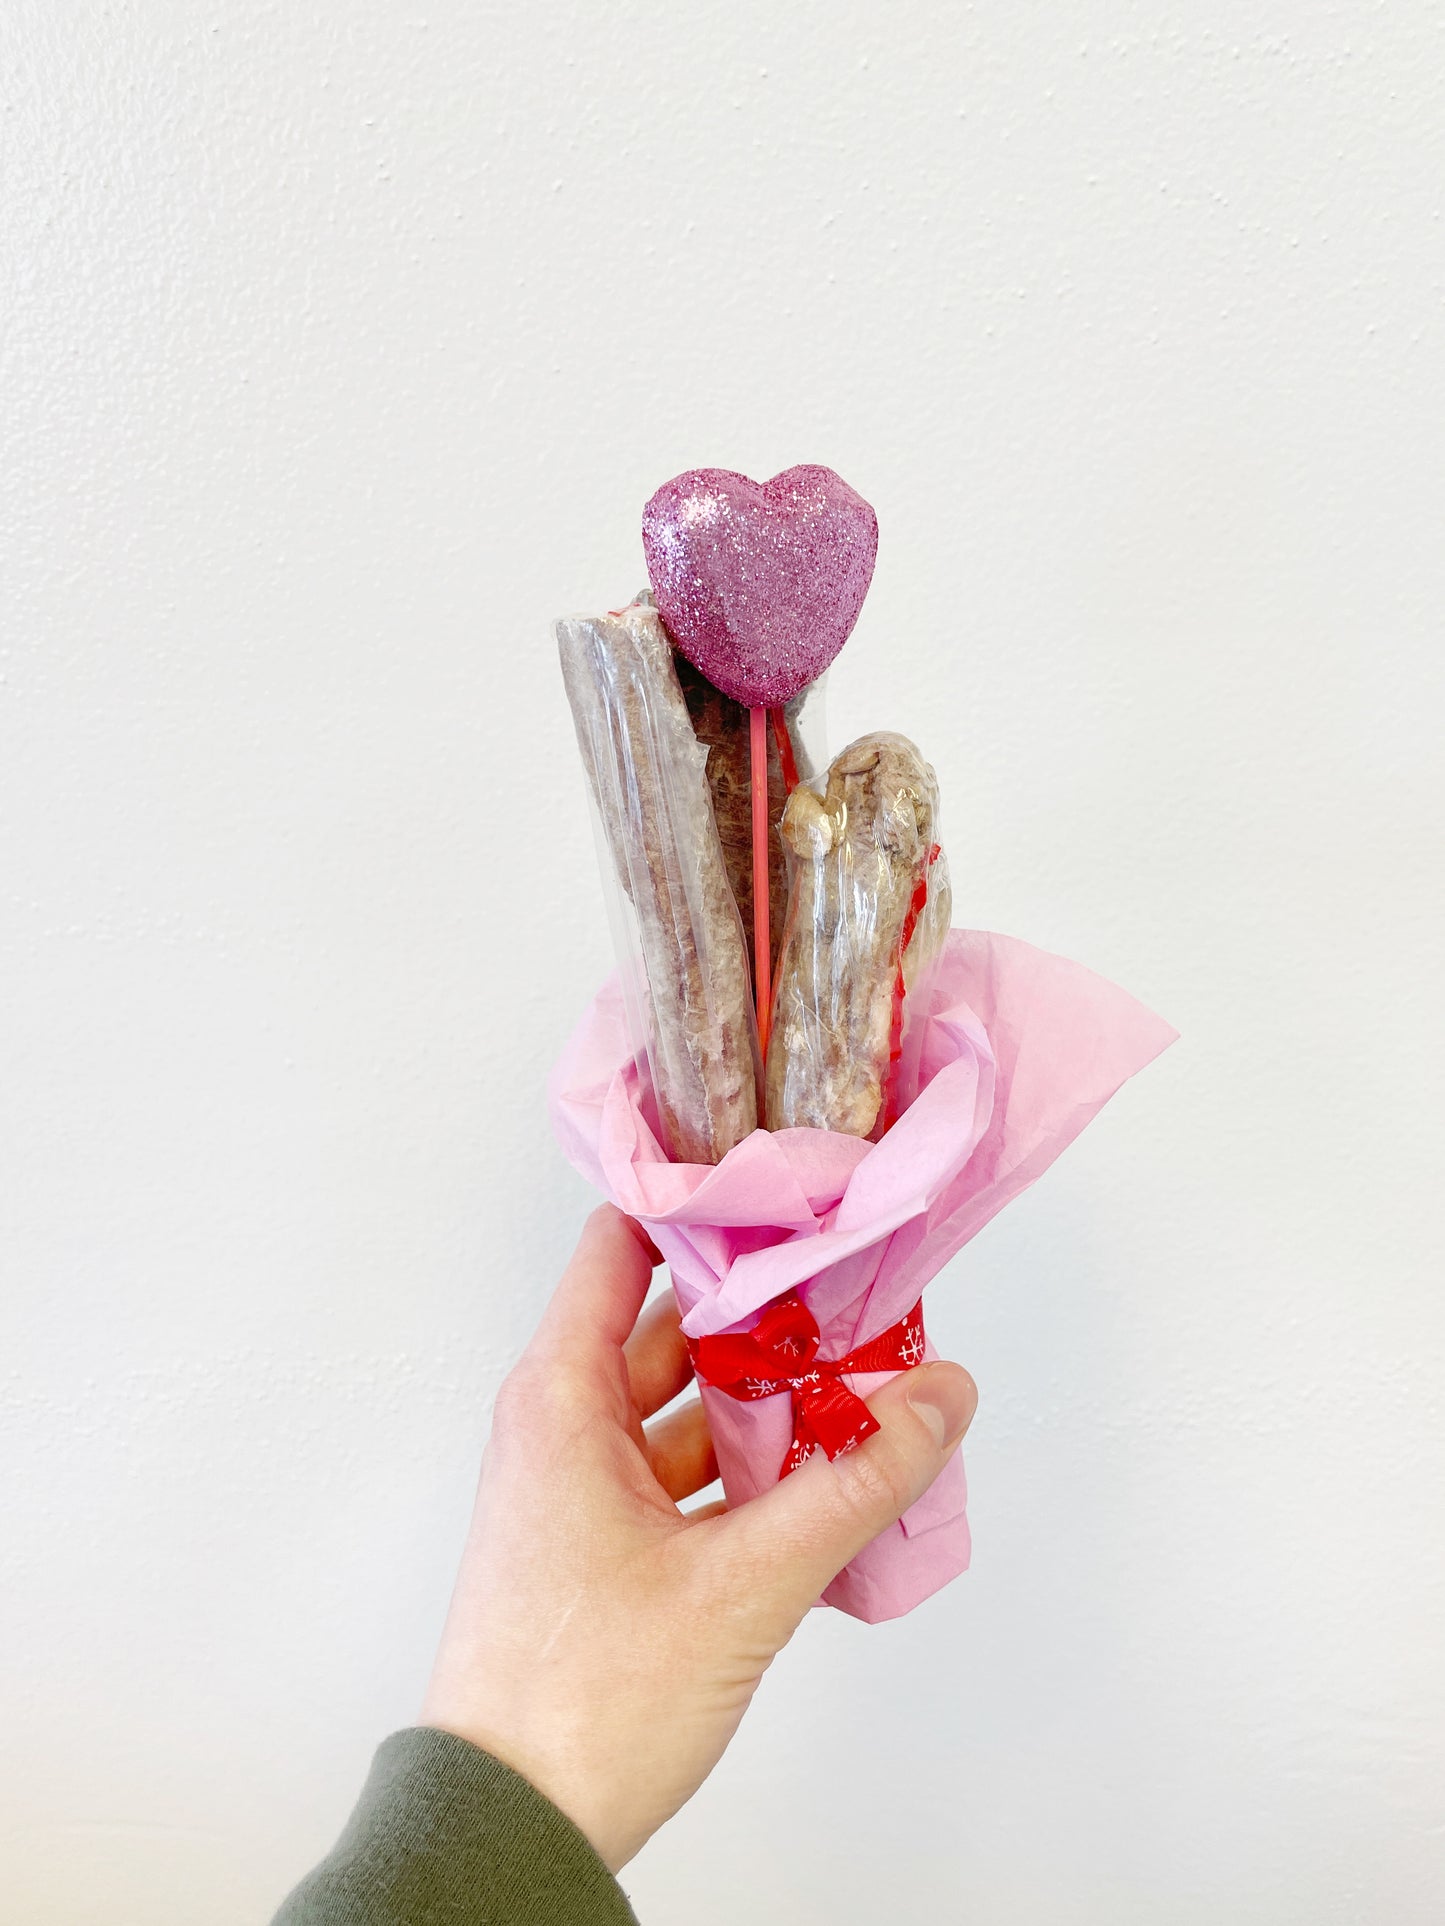 Hand holding a bouquet of bones with a decorative pink heart in the middle